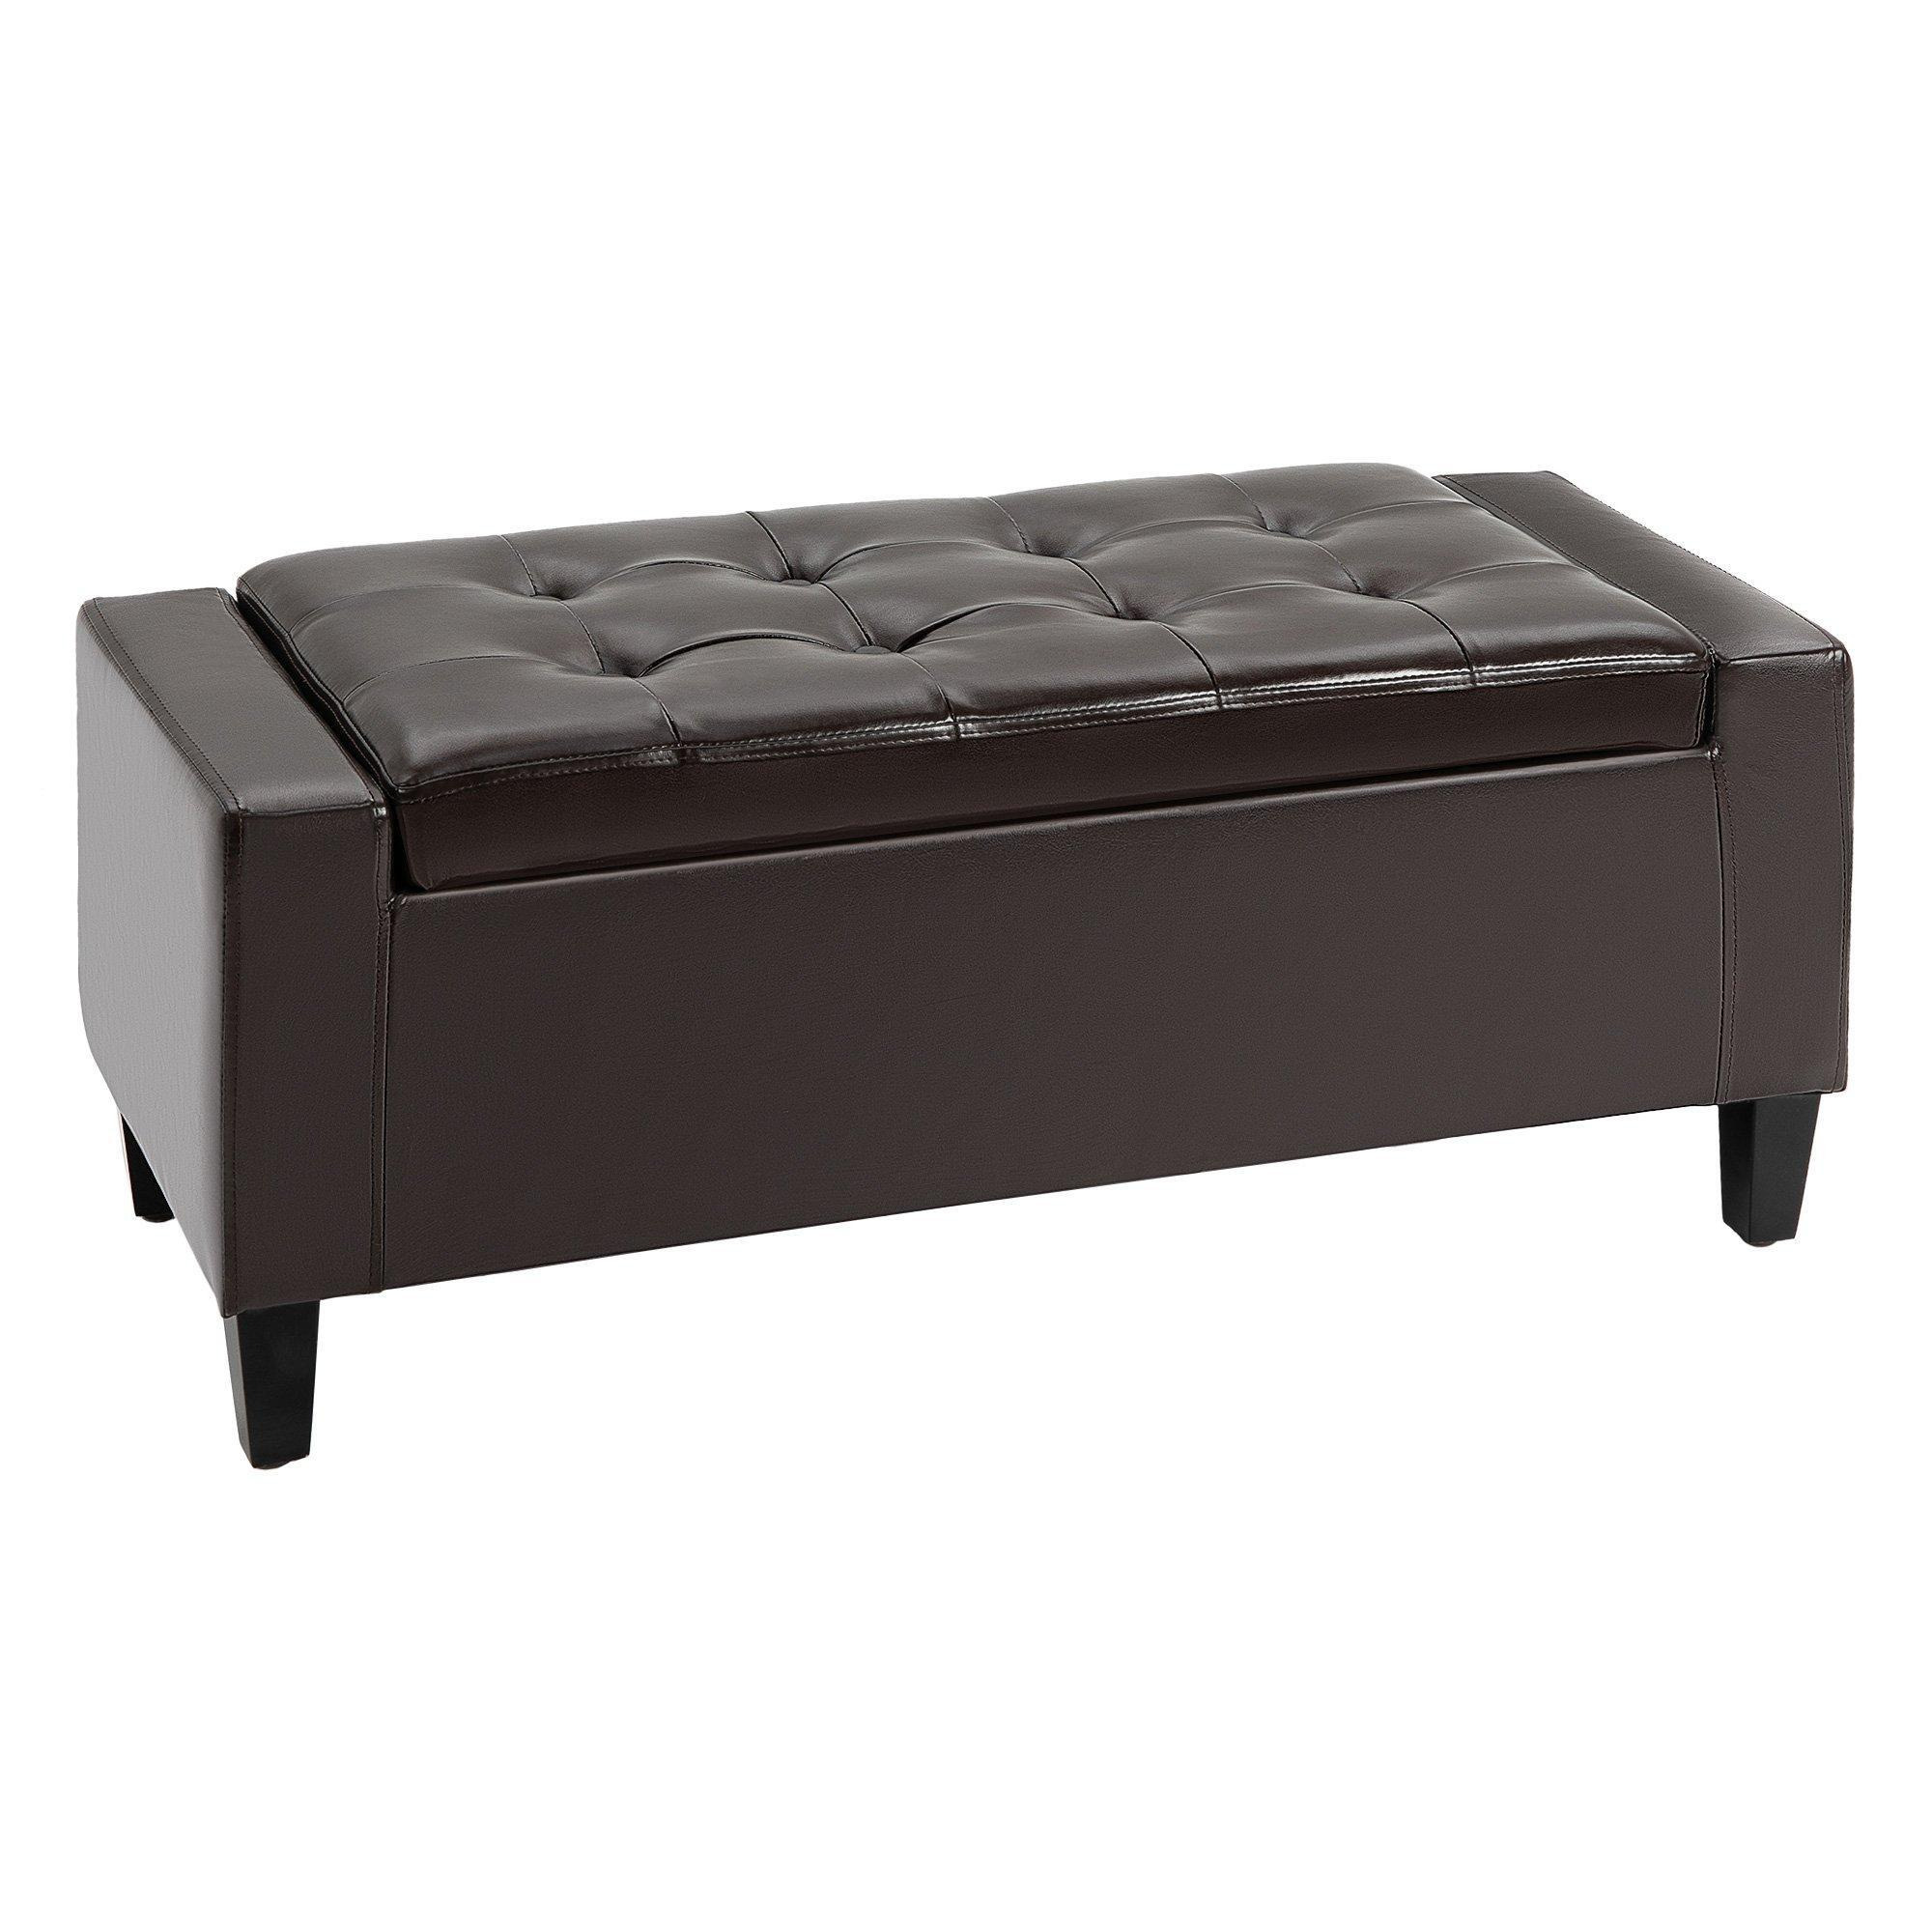 Deluxe PU Leather Storage Ottoman Bench Footrest Stool - image 1